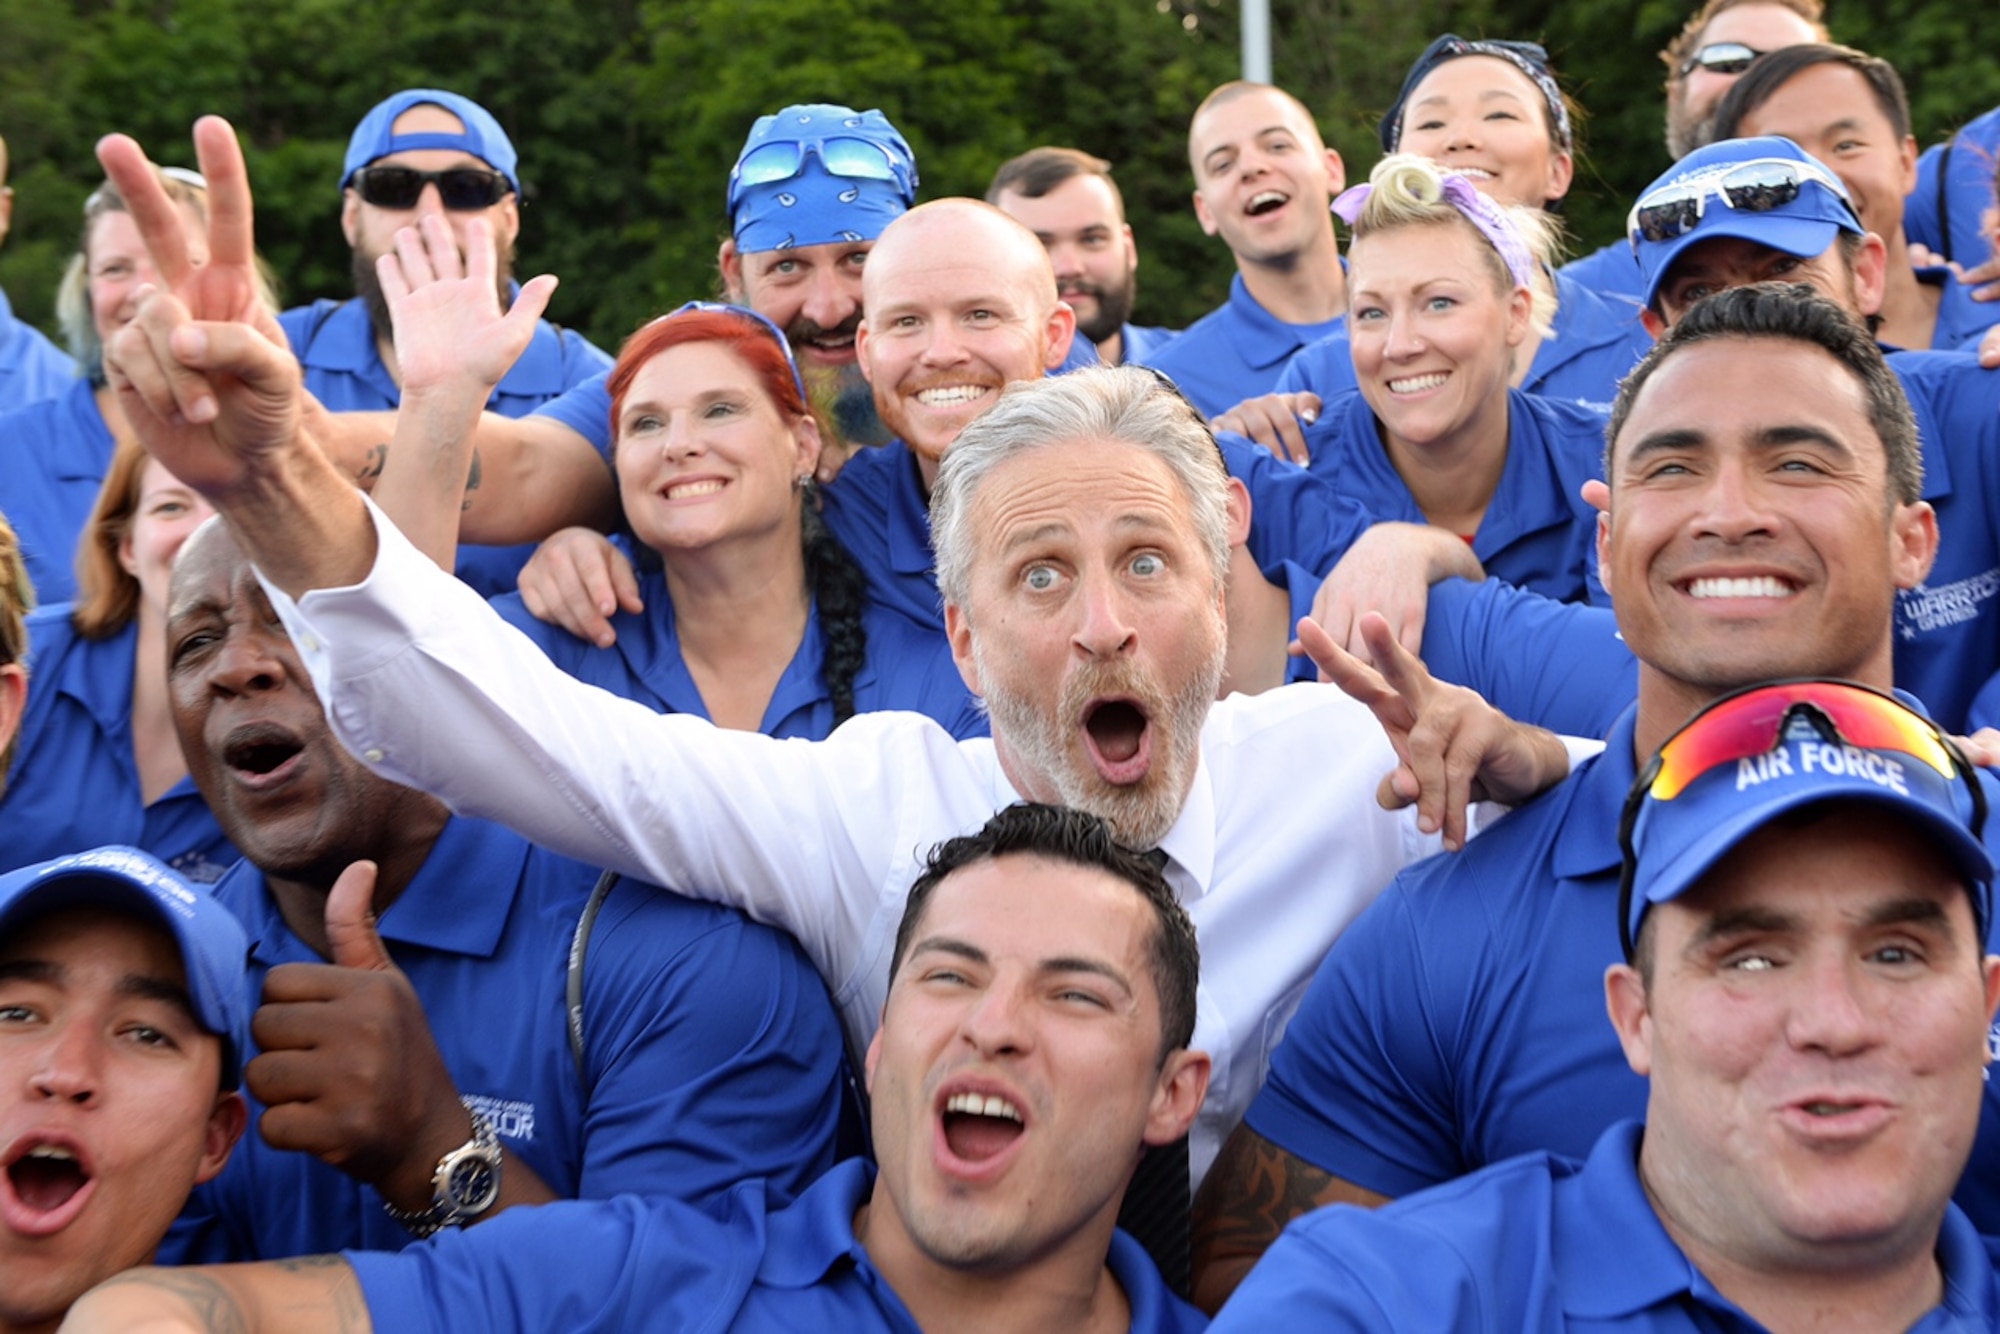 Comedian Jon Stewart, most notably of The Daily Show, poses for a photo with the Air Force team during the 2016 Department of Defense Warrior Games on June 15, 2016. Stewart emceed the opening ceremonies for the games. (Department of Defense photo/EJ Hersom)